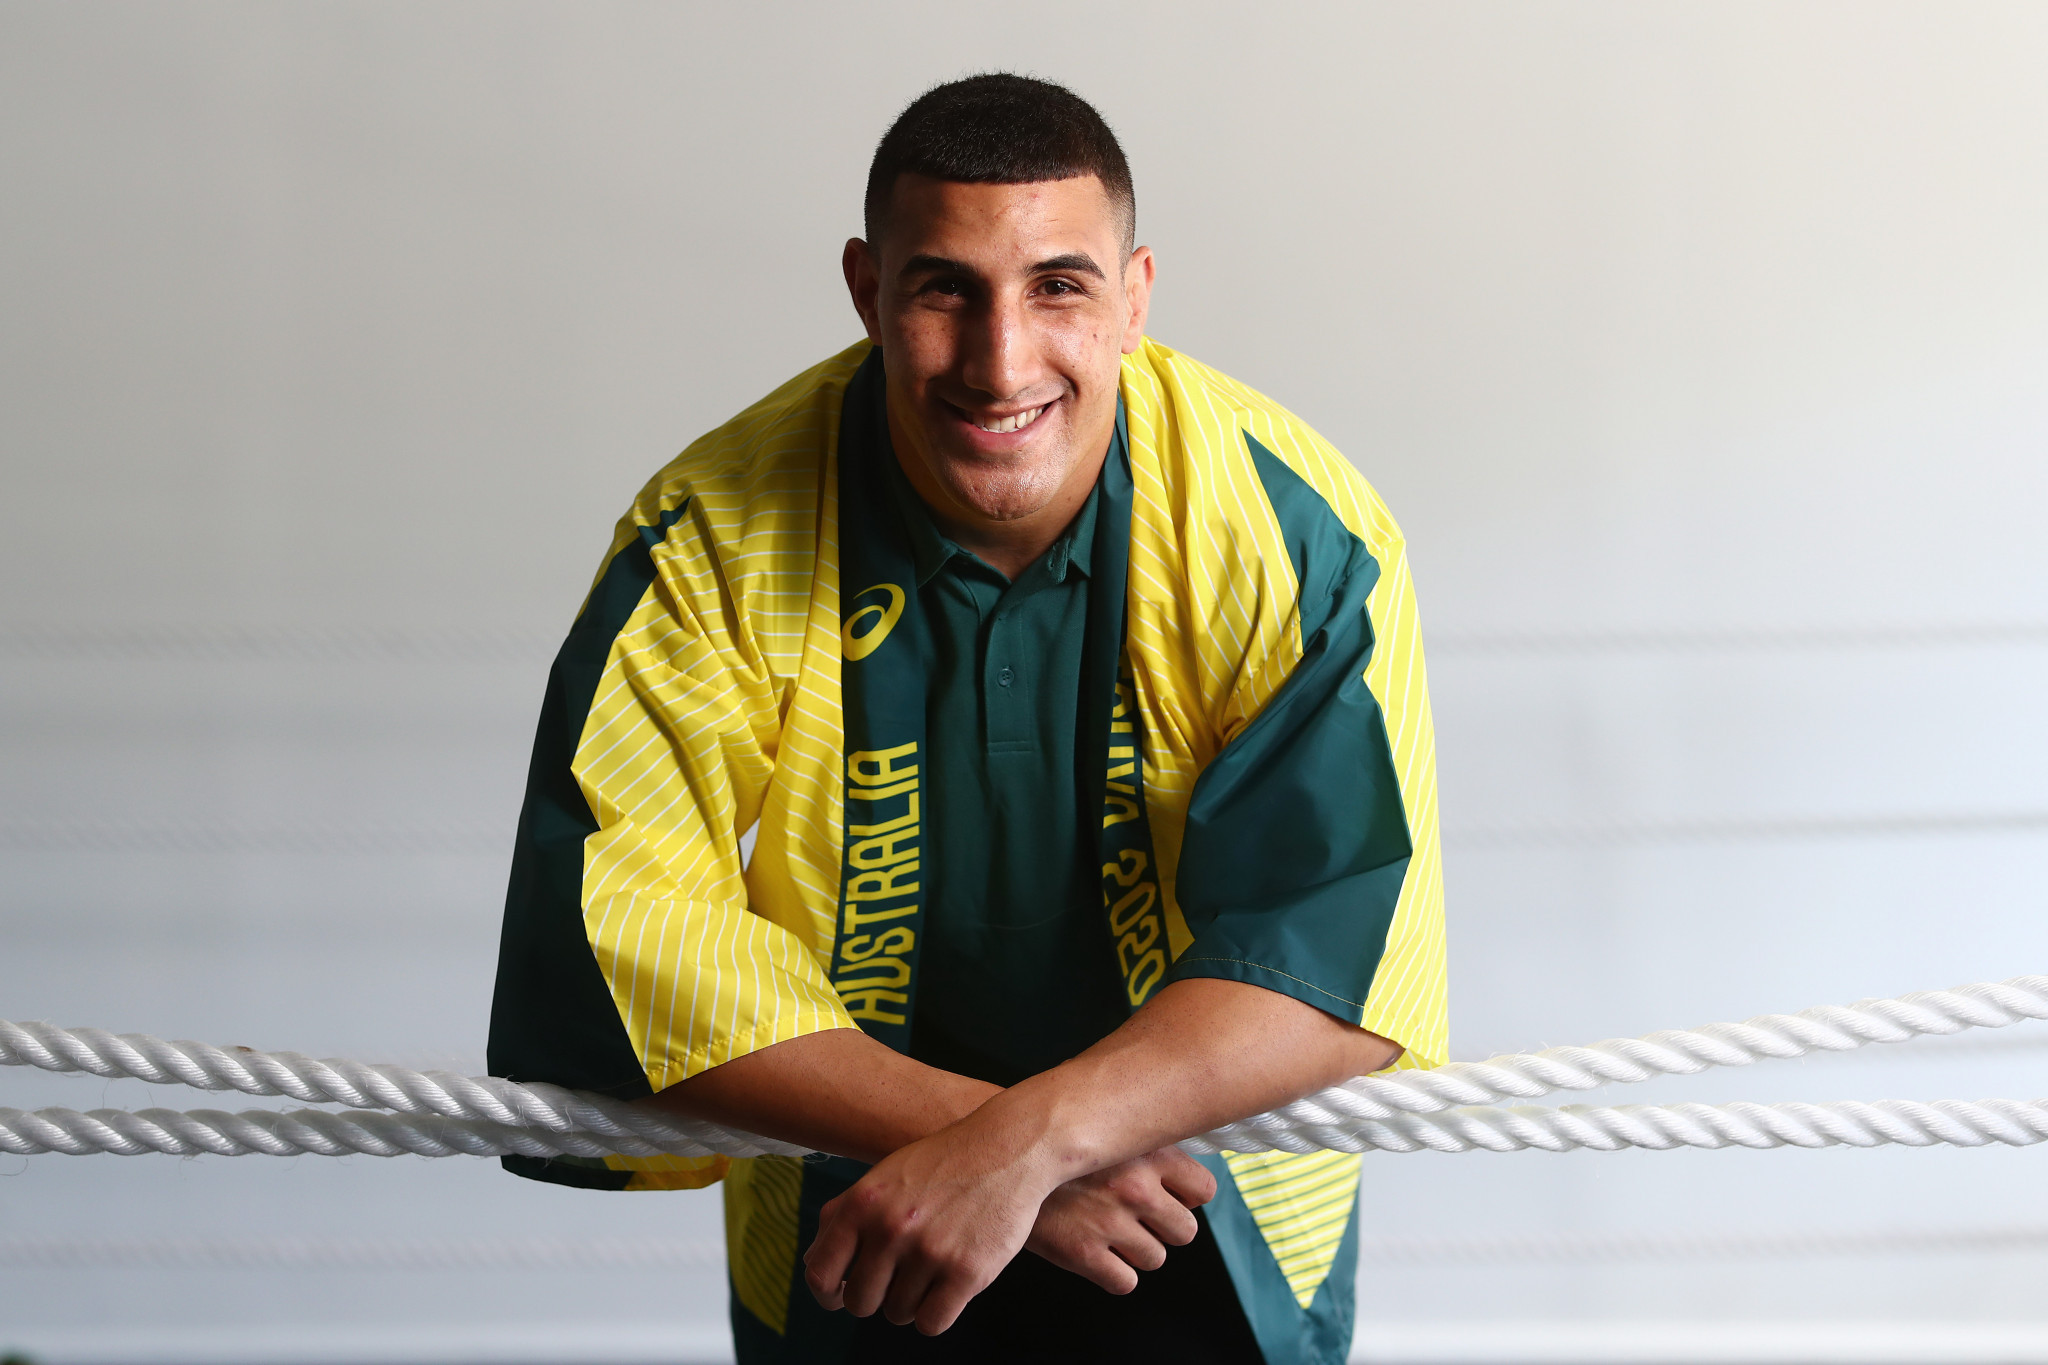 Australian Olympic Committee "very sad" after boxer pulls out of Tokyo 2020 through injury